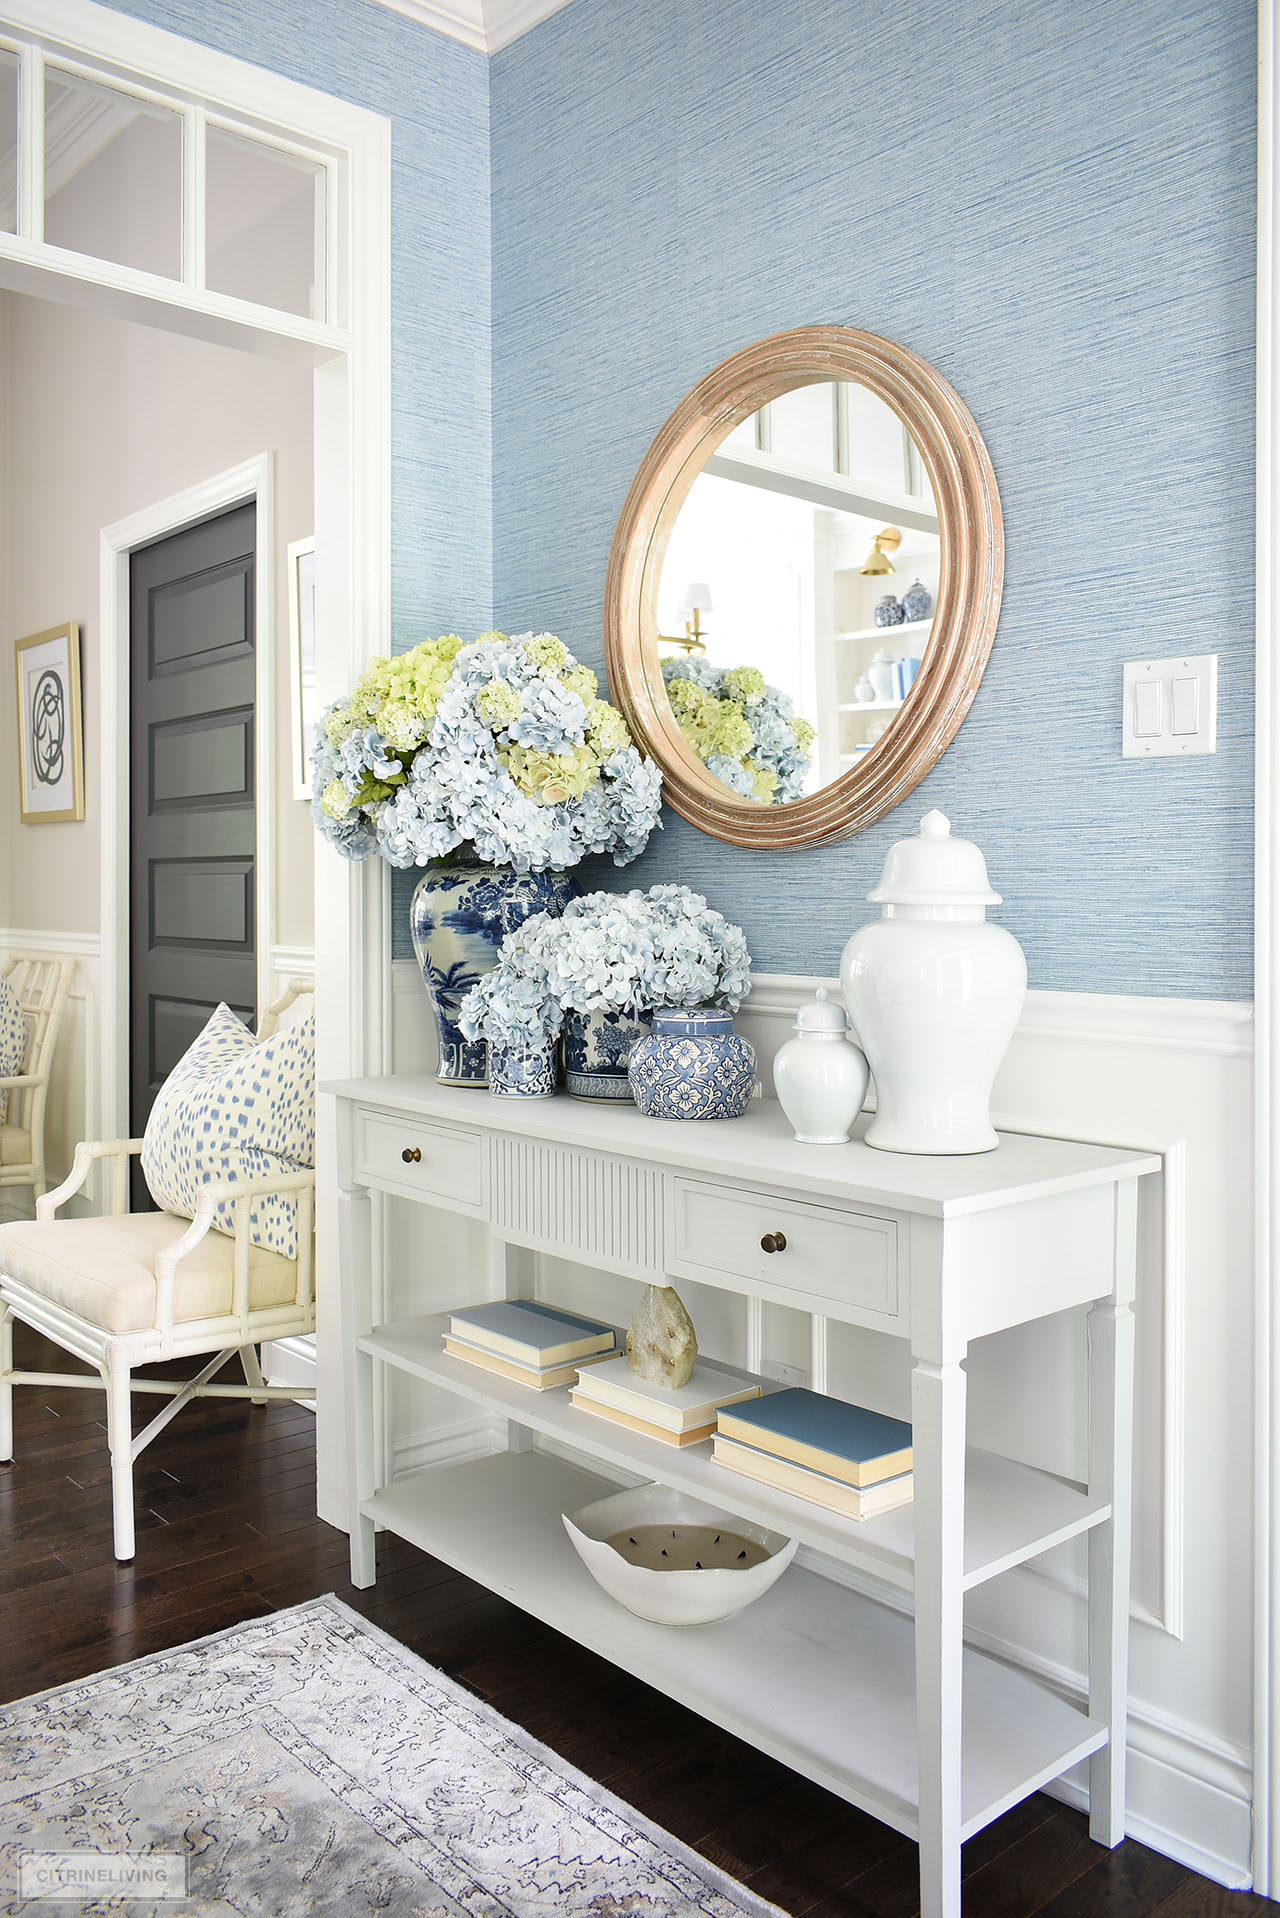 A gorgeous entryway decorated for summer with blue and white ginger jars styled with blue and green hydrangeas in a gorgeous full arrangement.